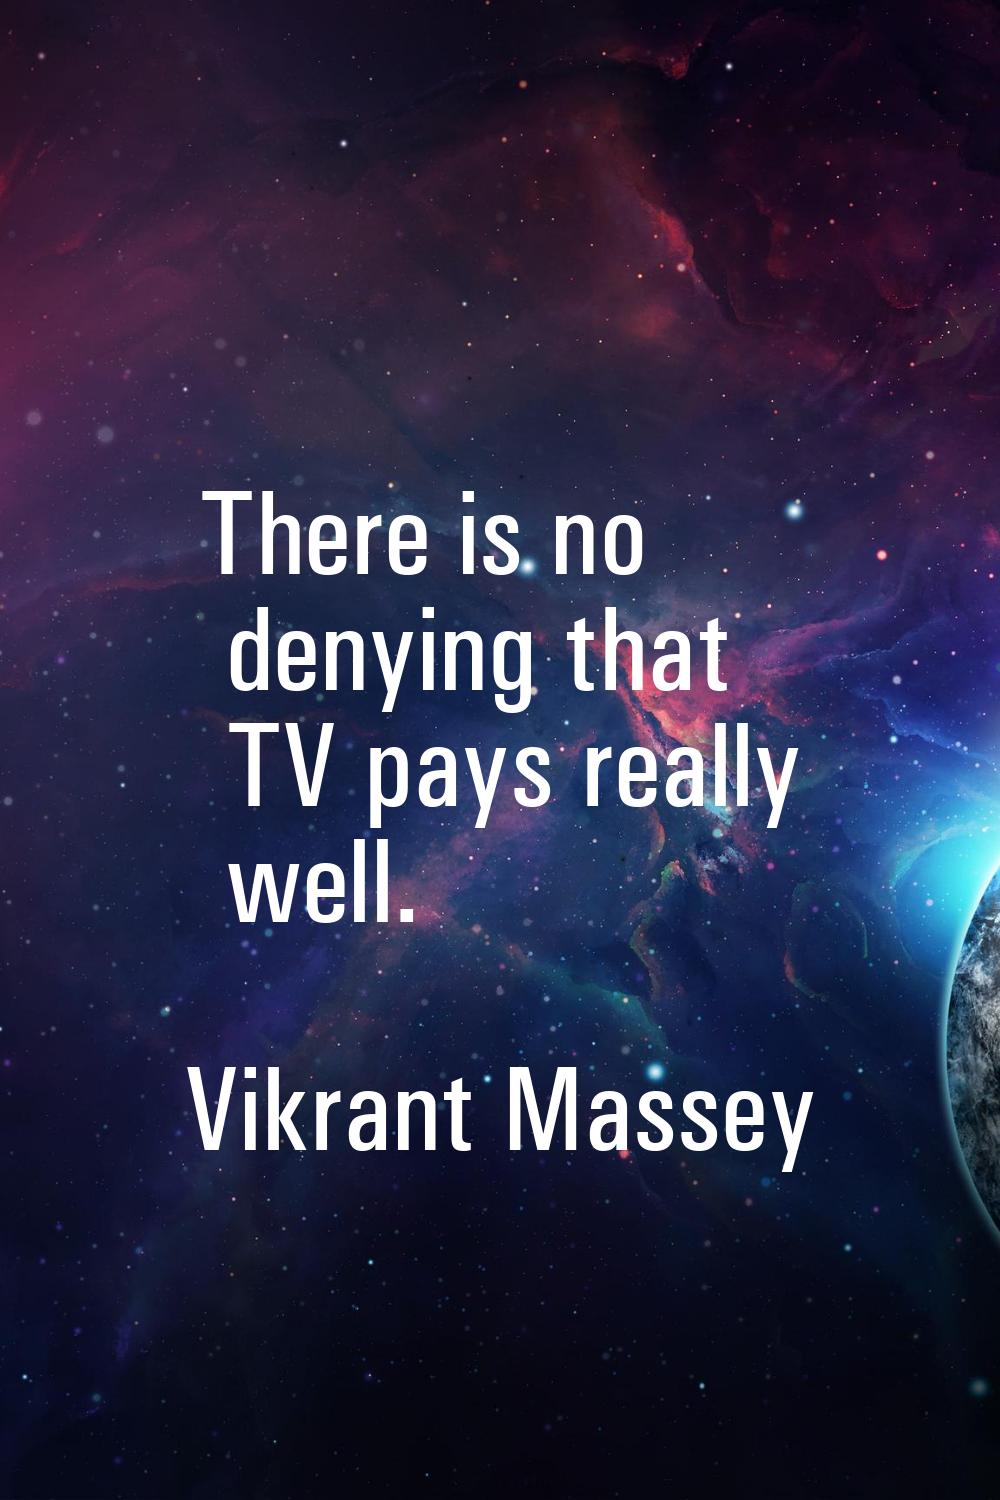 There is no denying that TV pays really well.